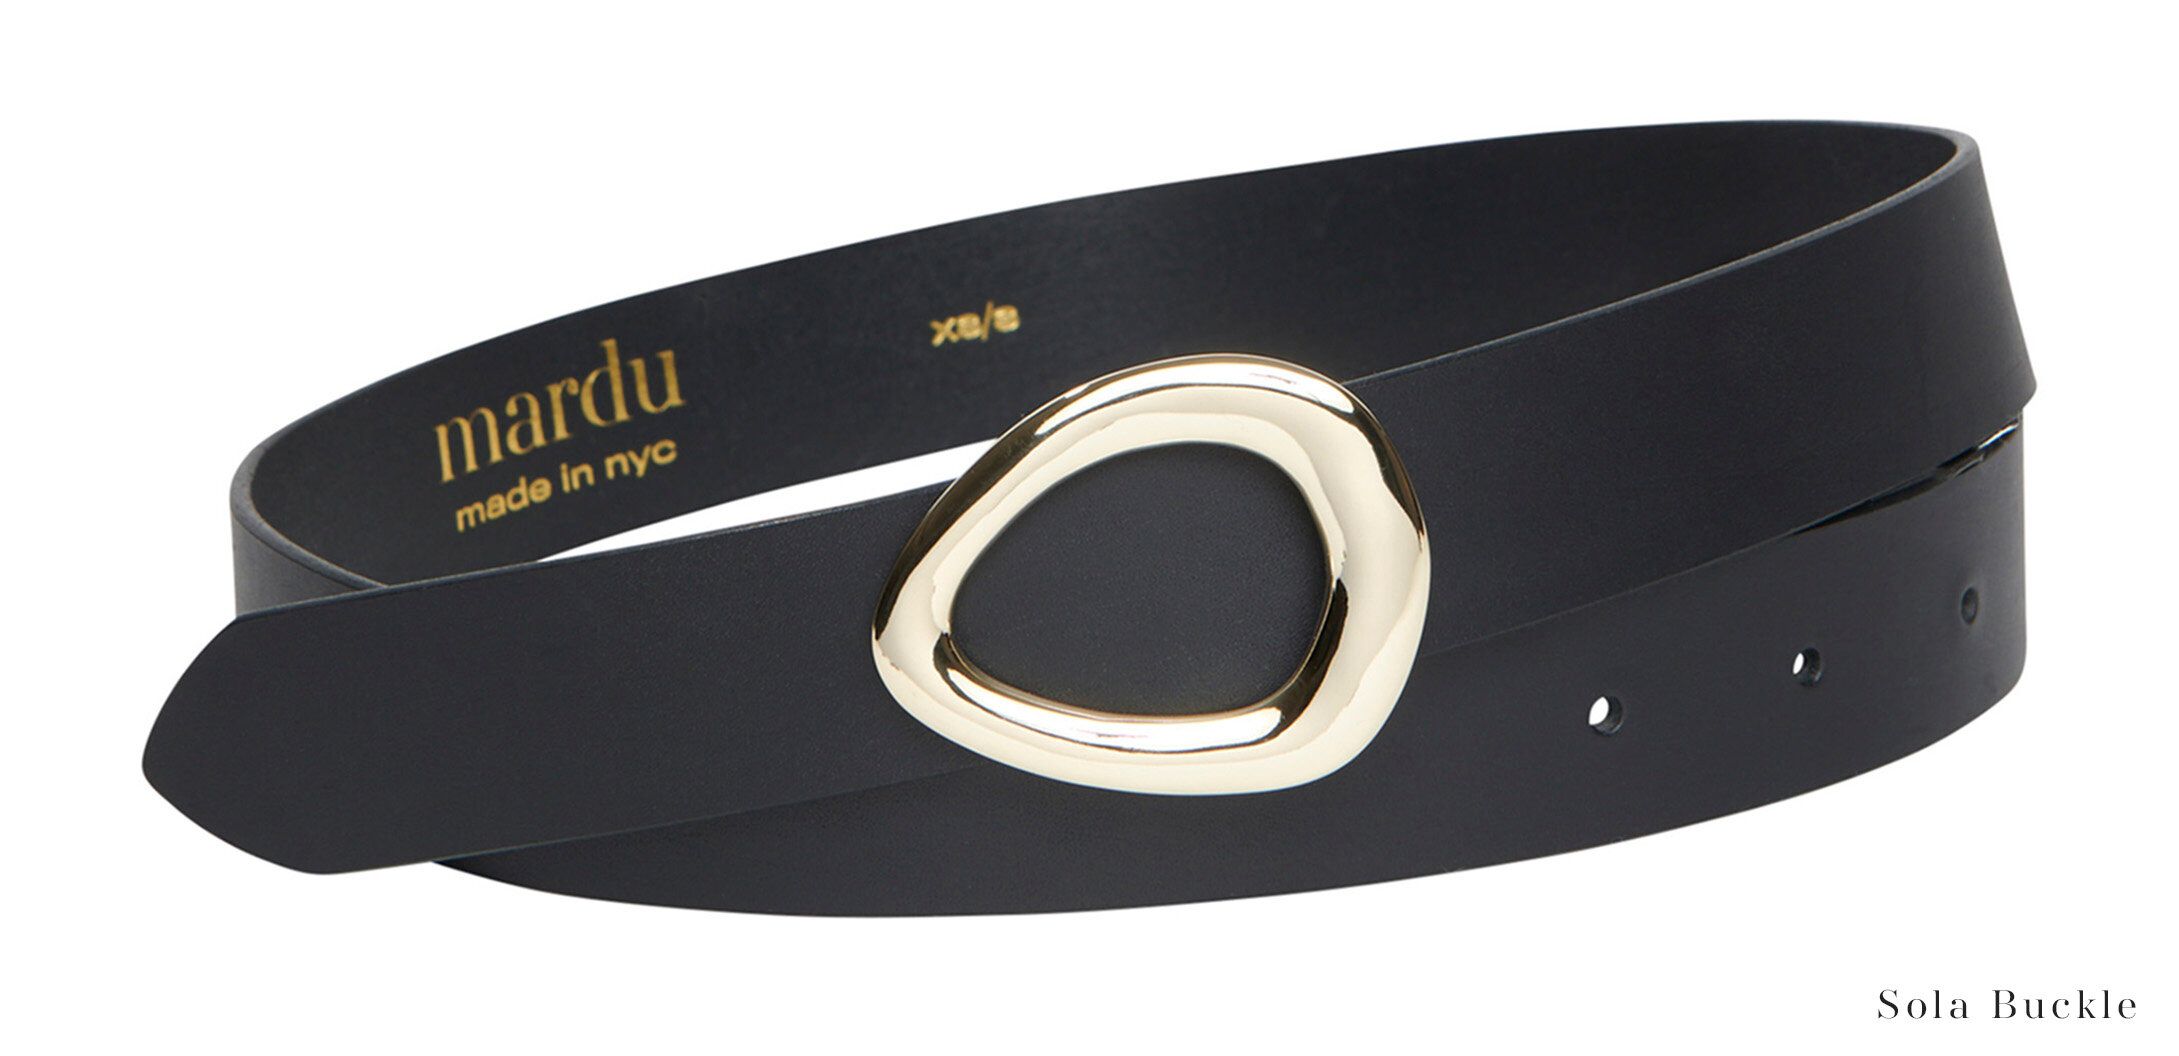 Product Image for Charcoal Black Belt, Sola Buckle